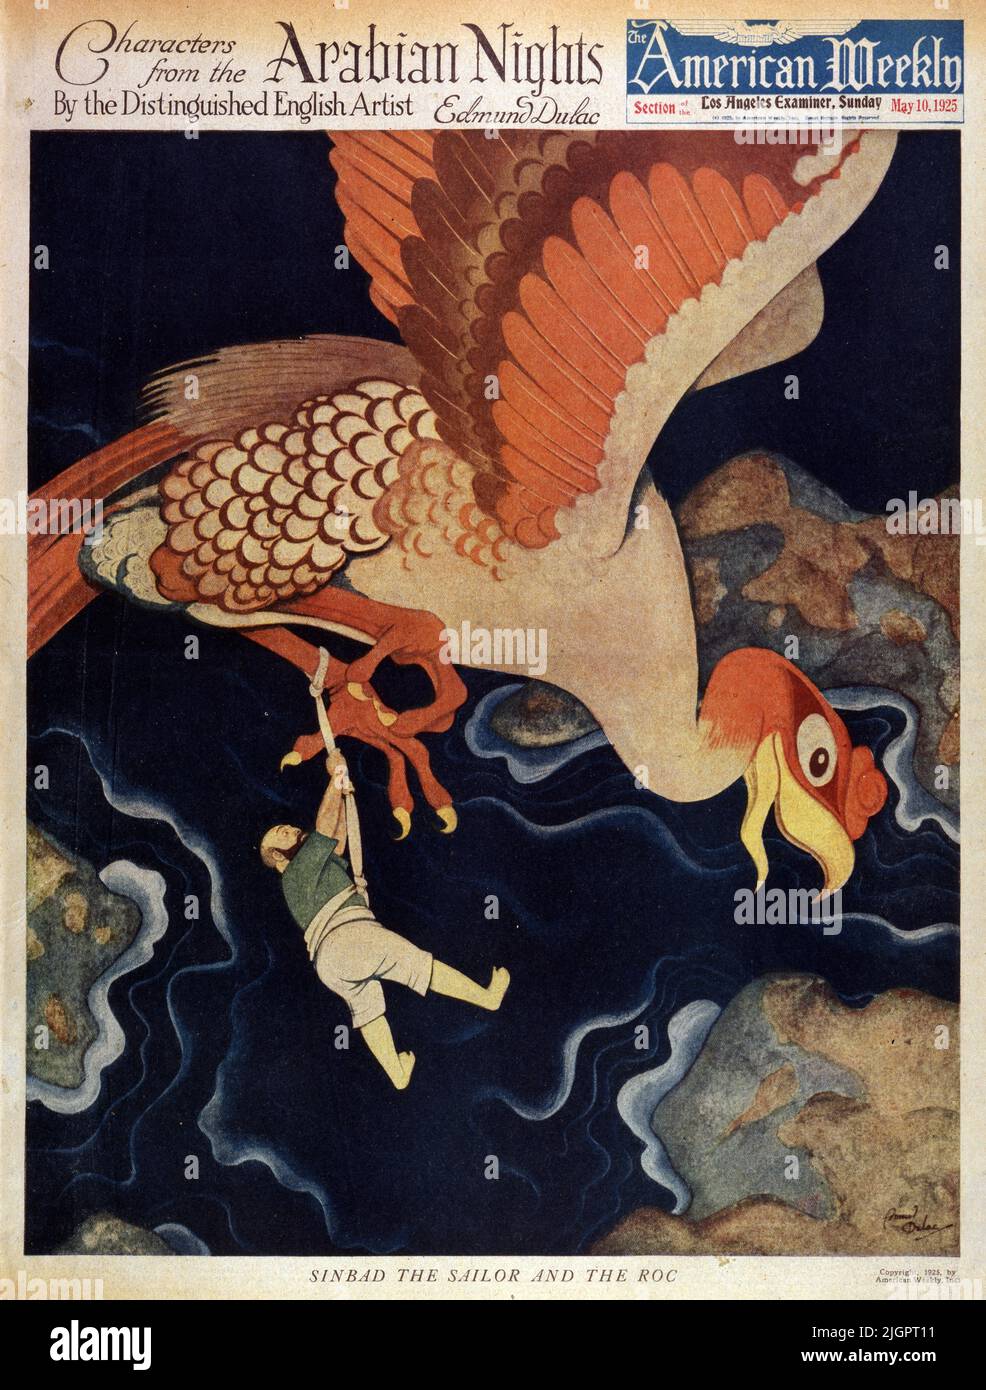 'Sinbad the Sailor and the Roc' published on May 10,1925 in the American Weekly Sunday magazine painted by Edmund Dulac as part of the 'Characters from the Arabian Nights' series. Stock Photo